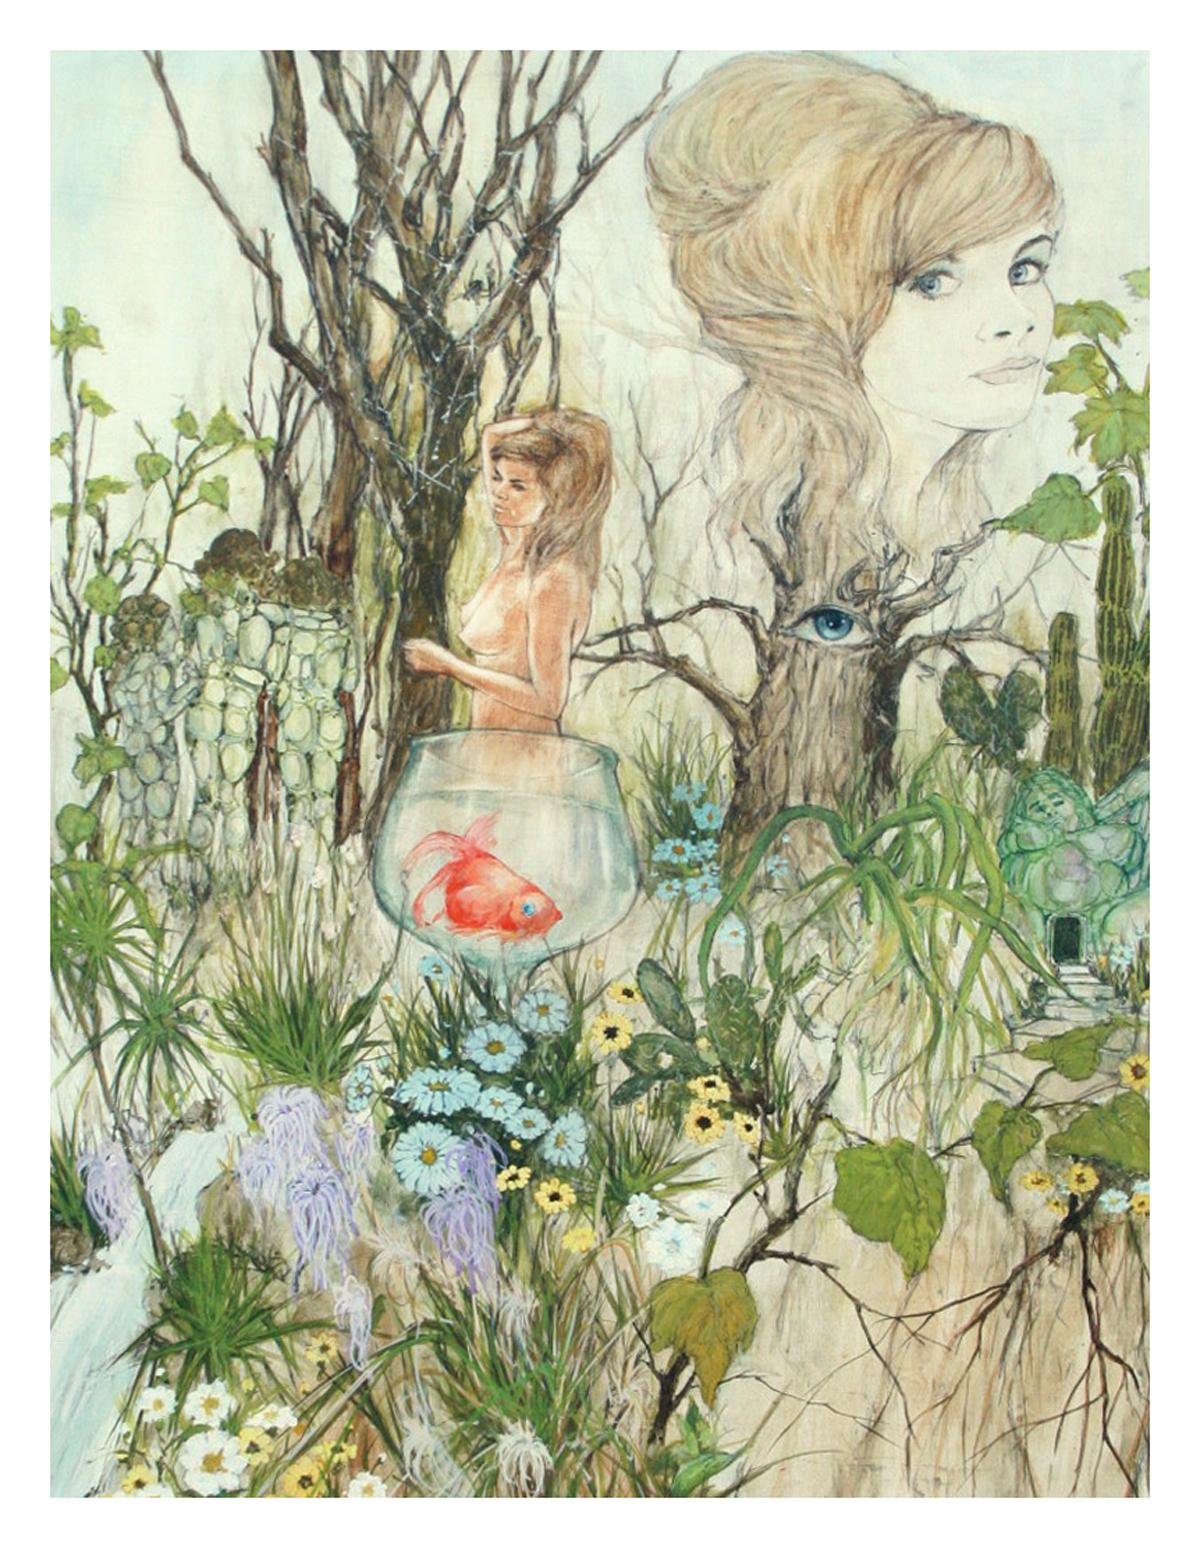 Woodland Fancy, Mid-Century Fantastical Figurative Landscape 1969 - Painting by Kenneth Fong 